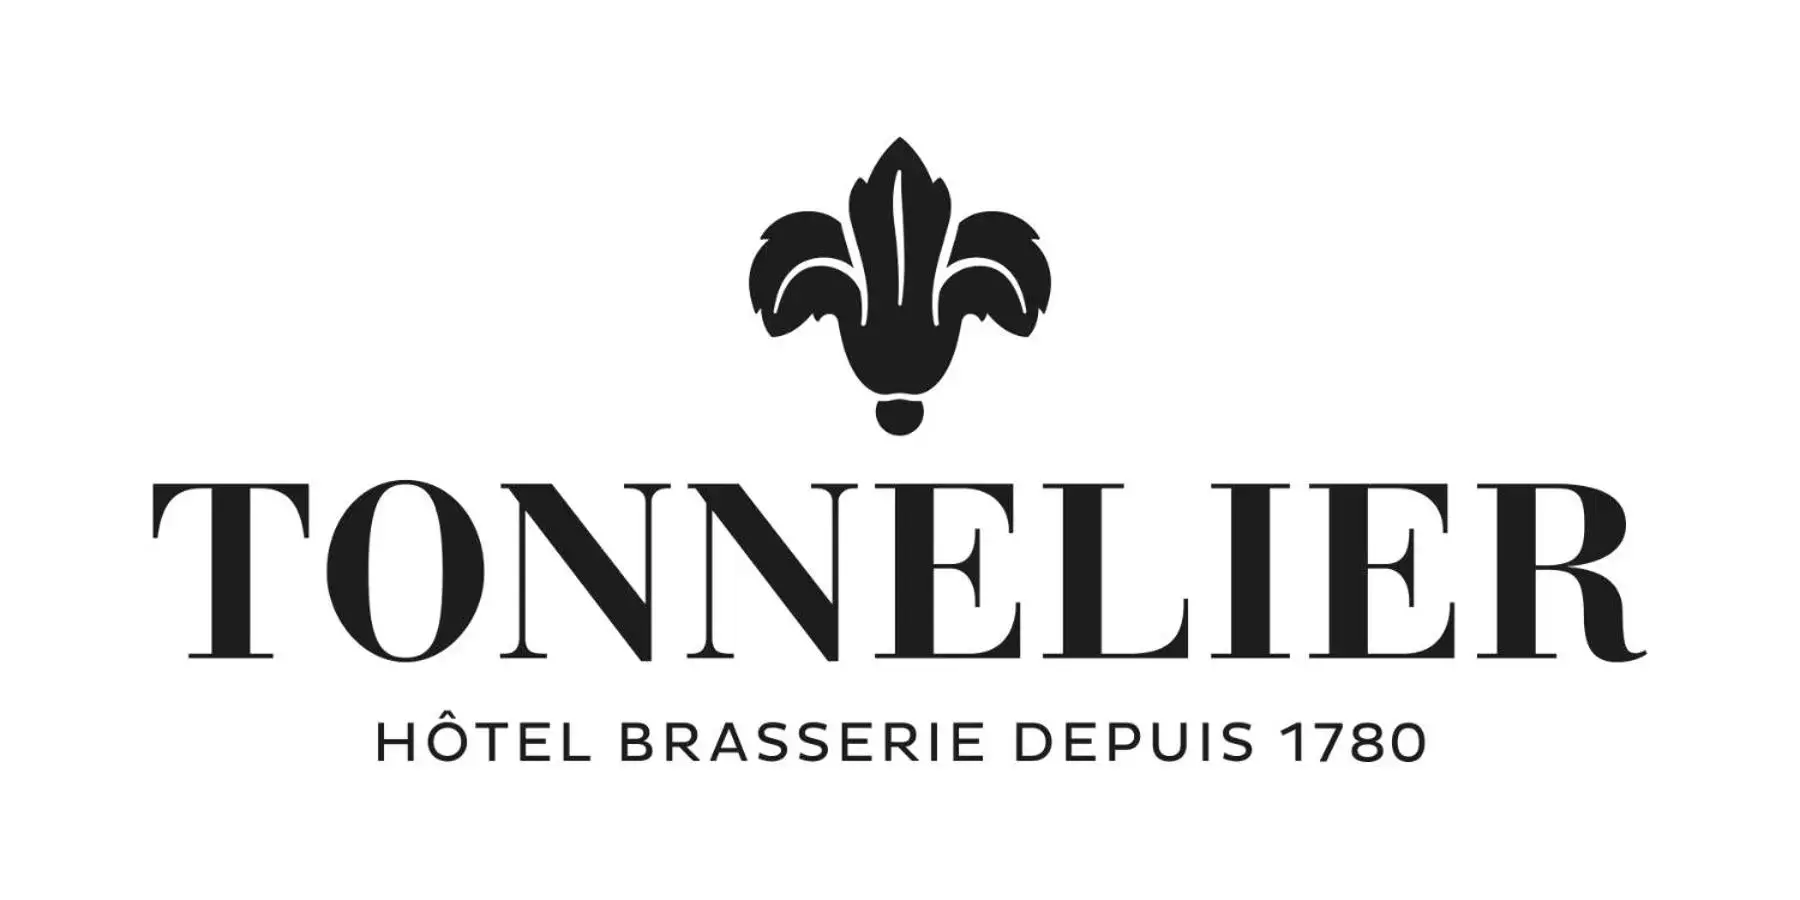 Property logo or sign in Le Tonnelier